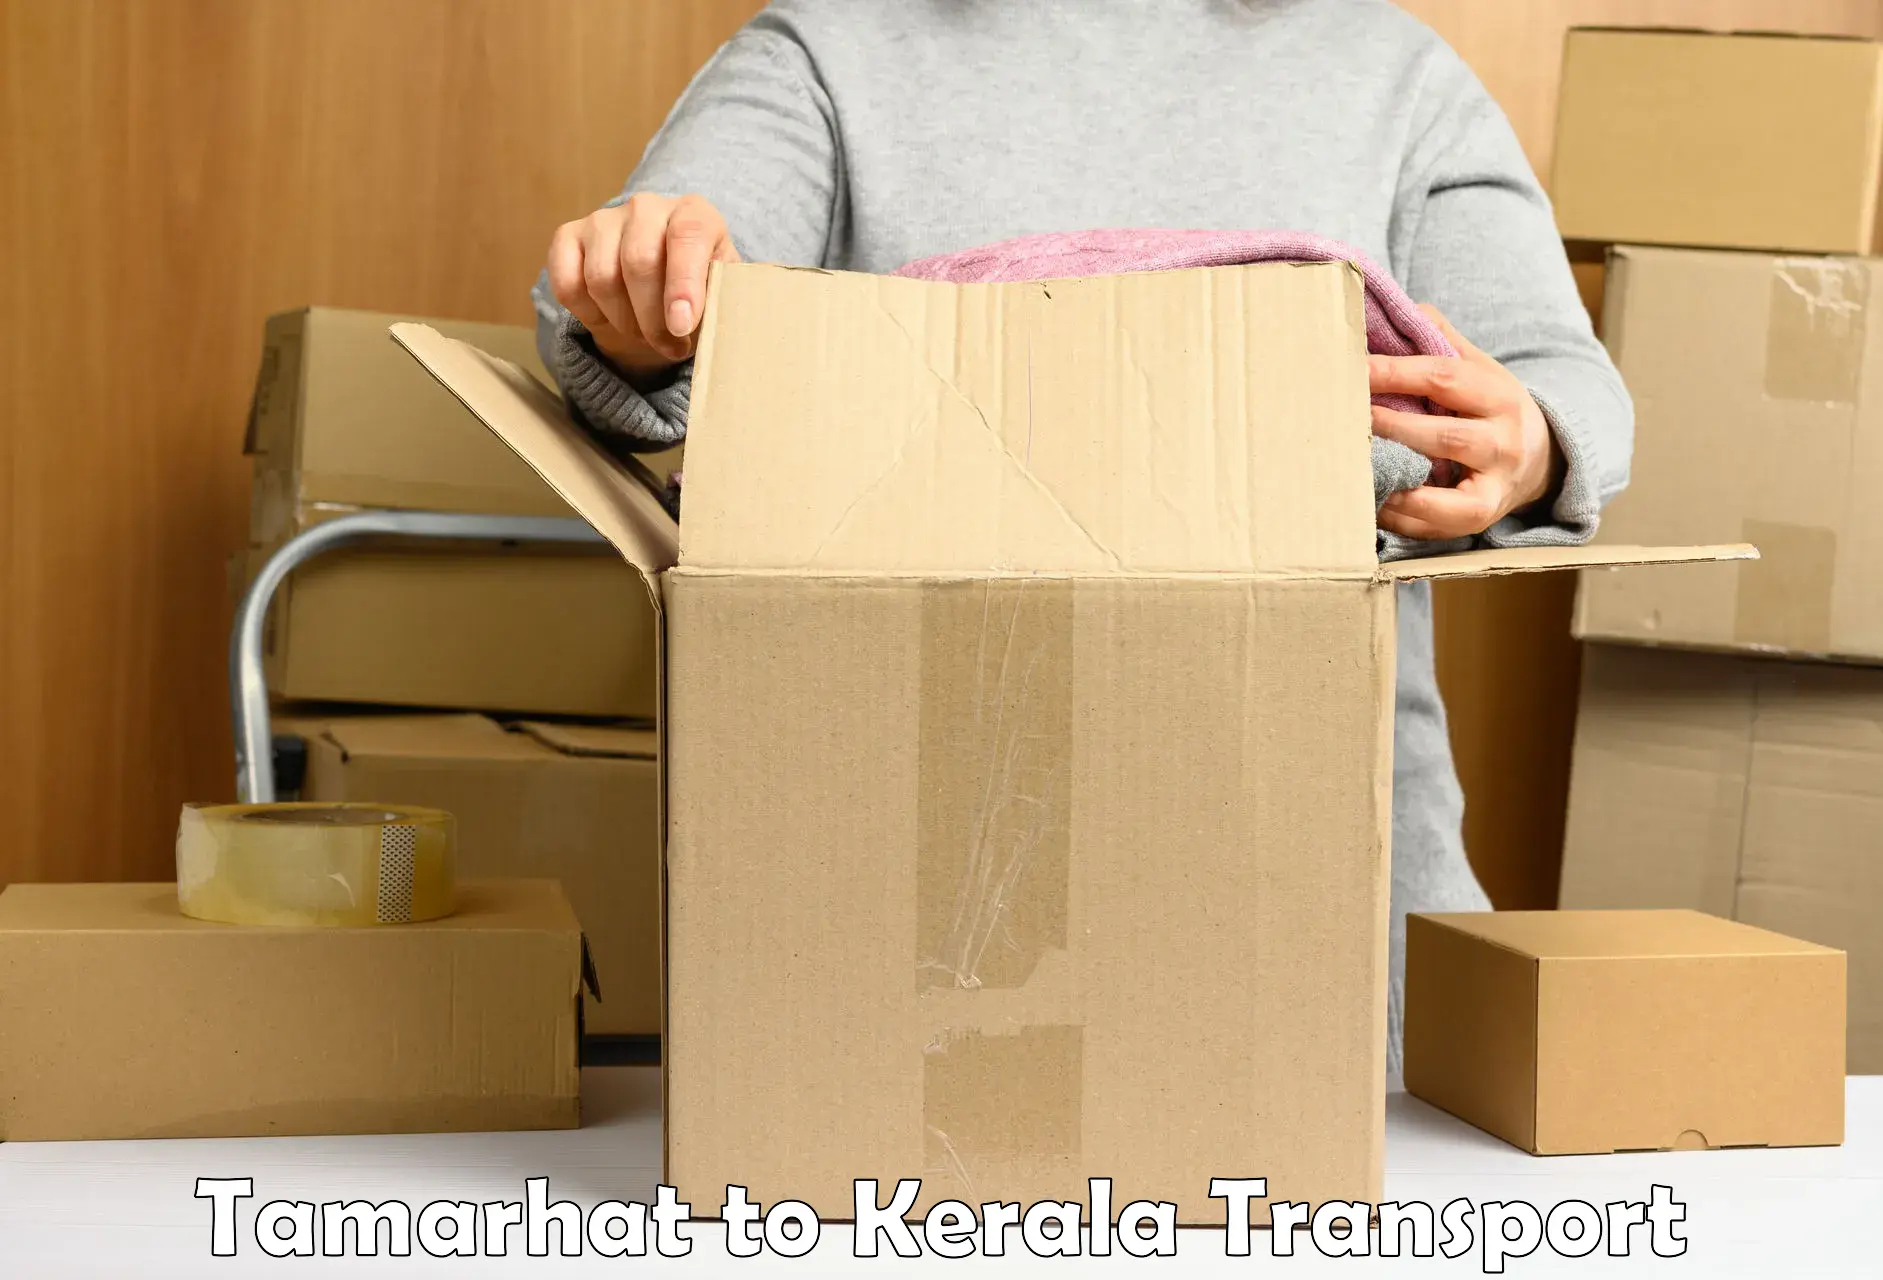 Transportation solution services Tamarhat to Palakkad